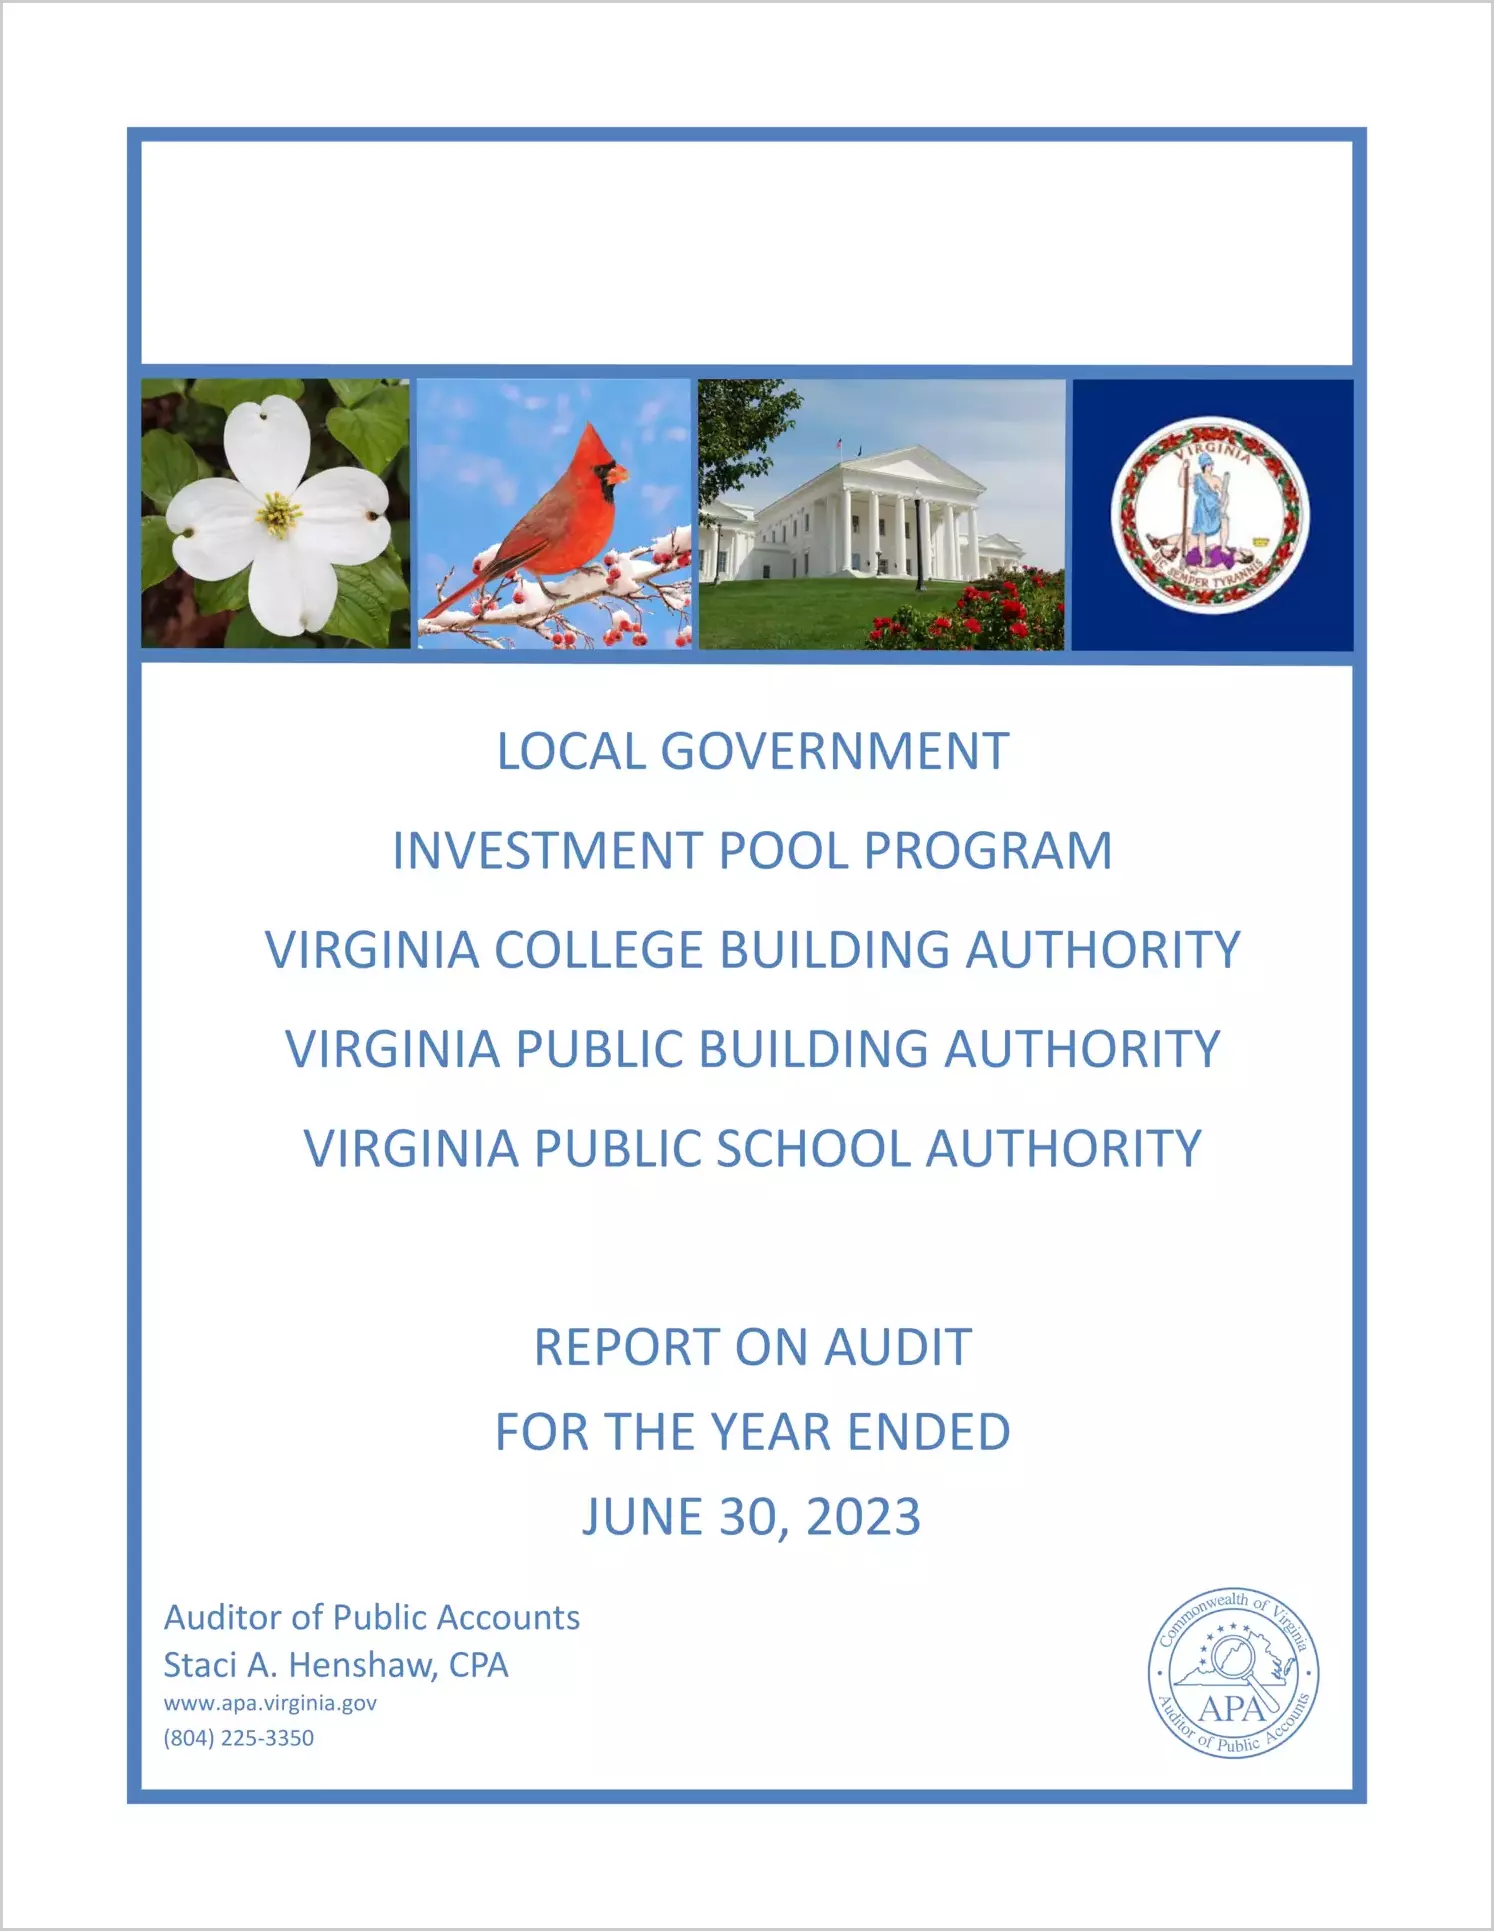 Local Government Investment Pool Program, Virginia College Building Authority, Virginia Public Building Authority, Virginia Public School Authority for the year ended June 30, 2023